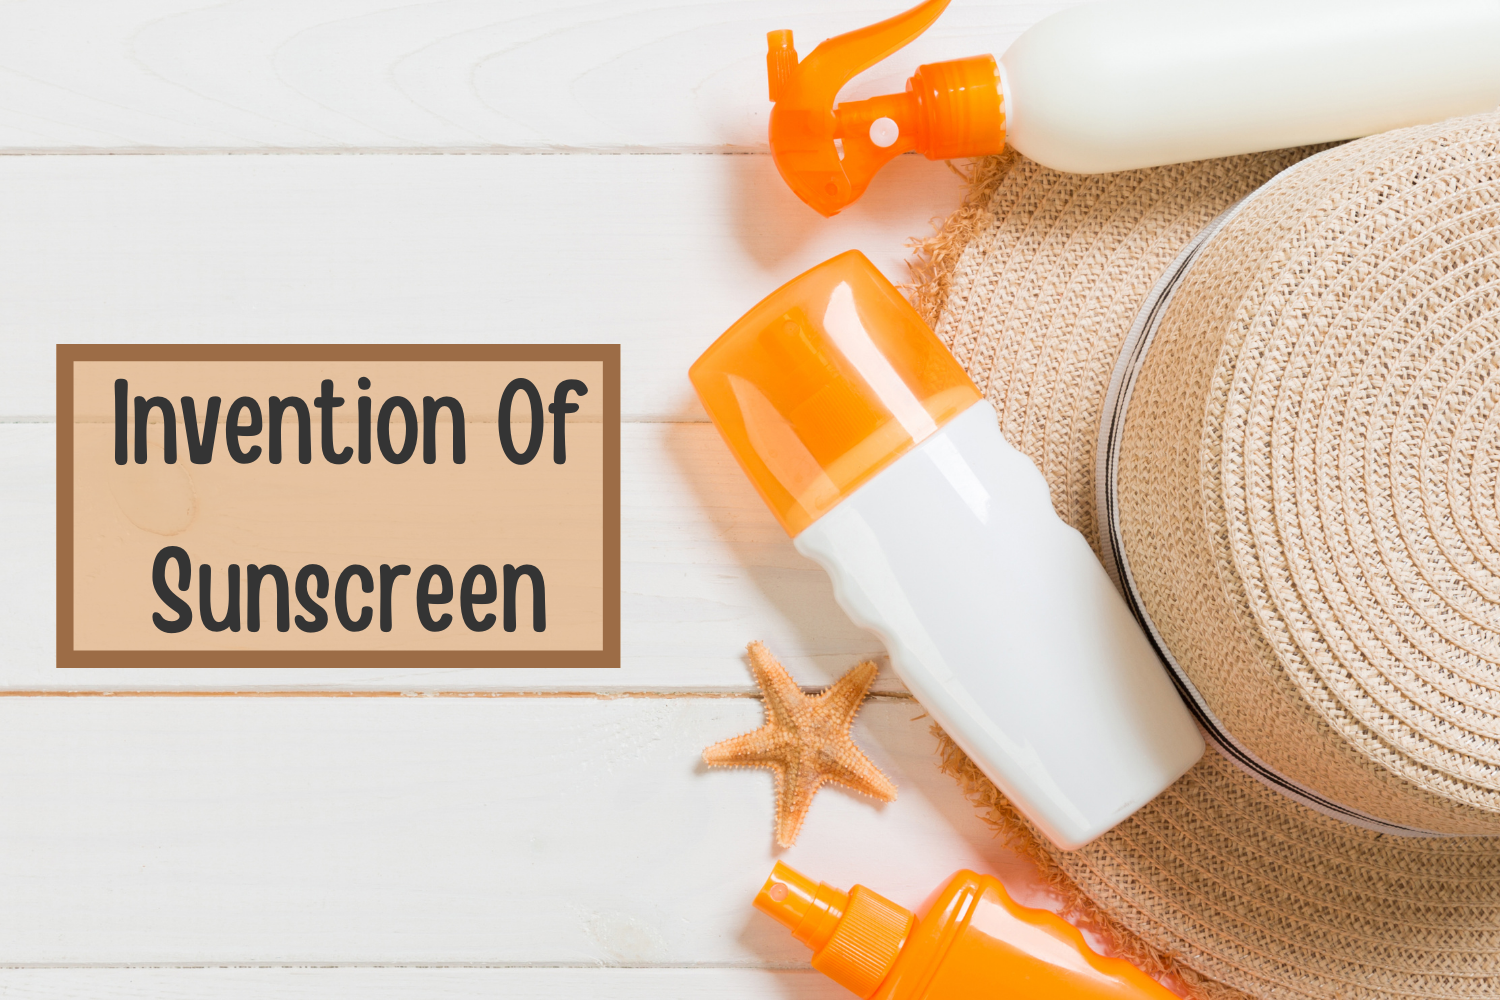 who invented sunscreen?